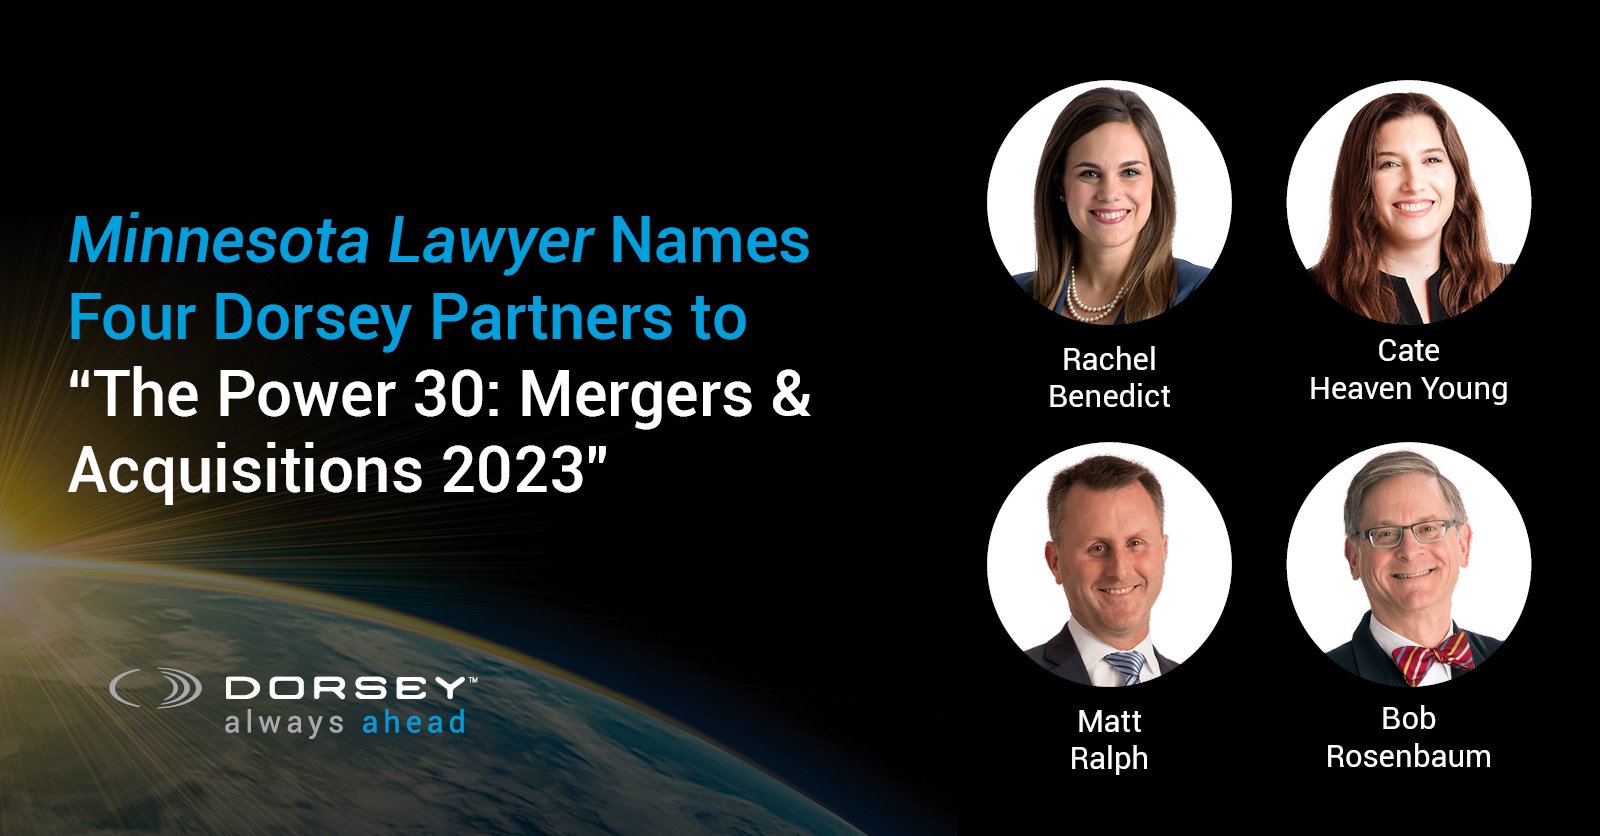 Minnesota Lawyer Names Four Dorsey Partners to the Power 30: Mergers & Acquistions